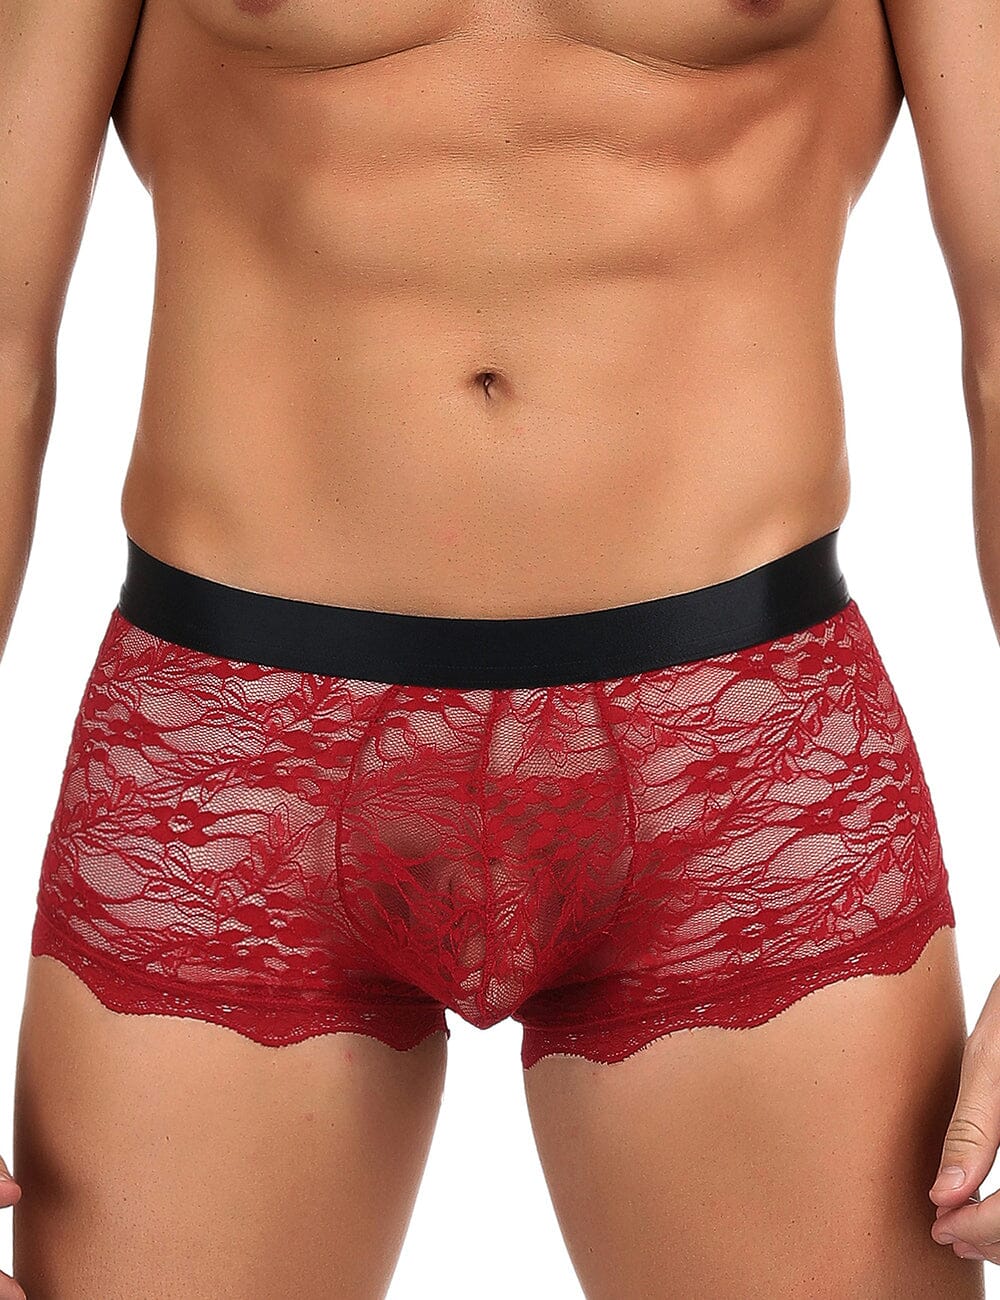 a close up of a man wearing a red underwear